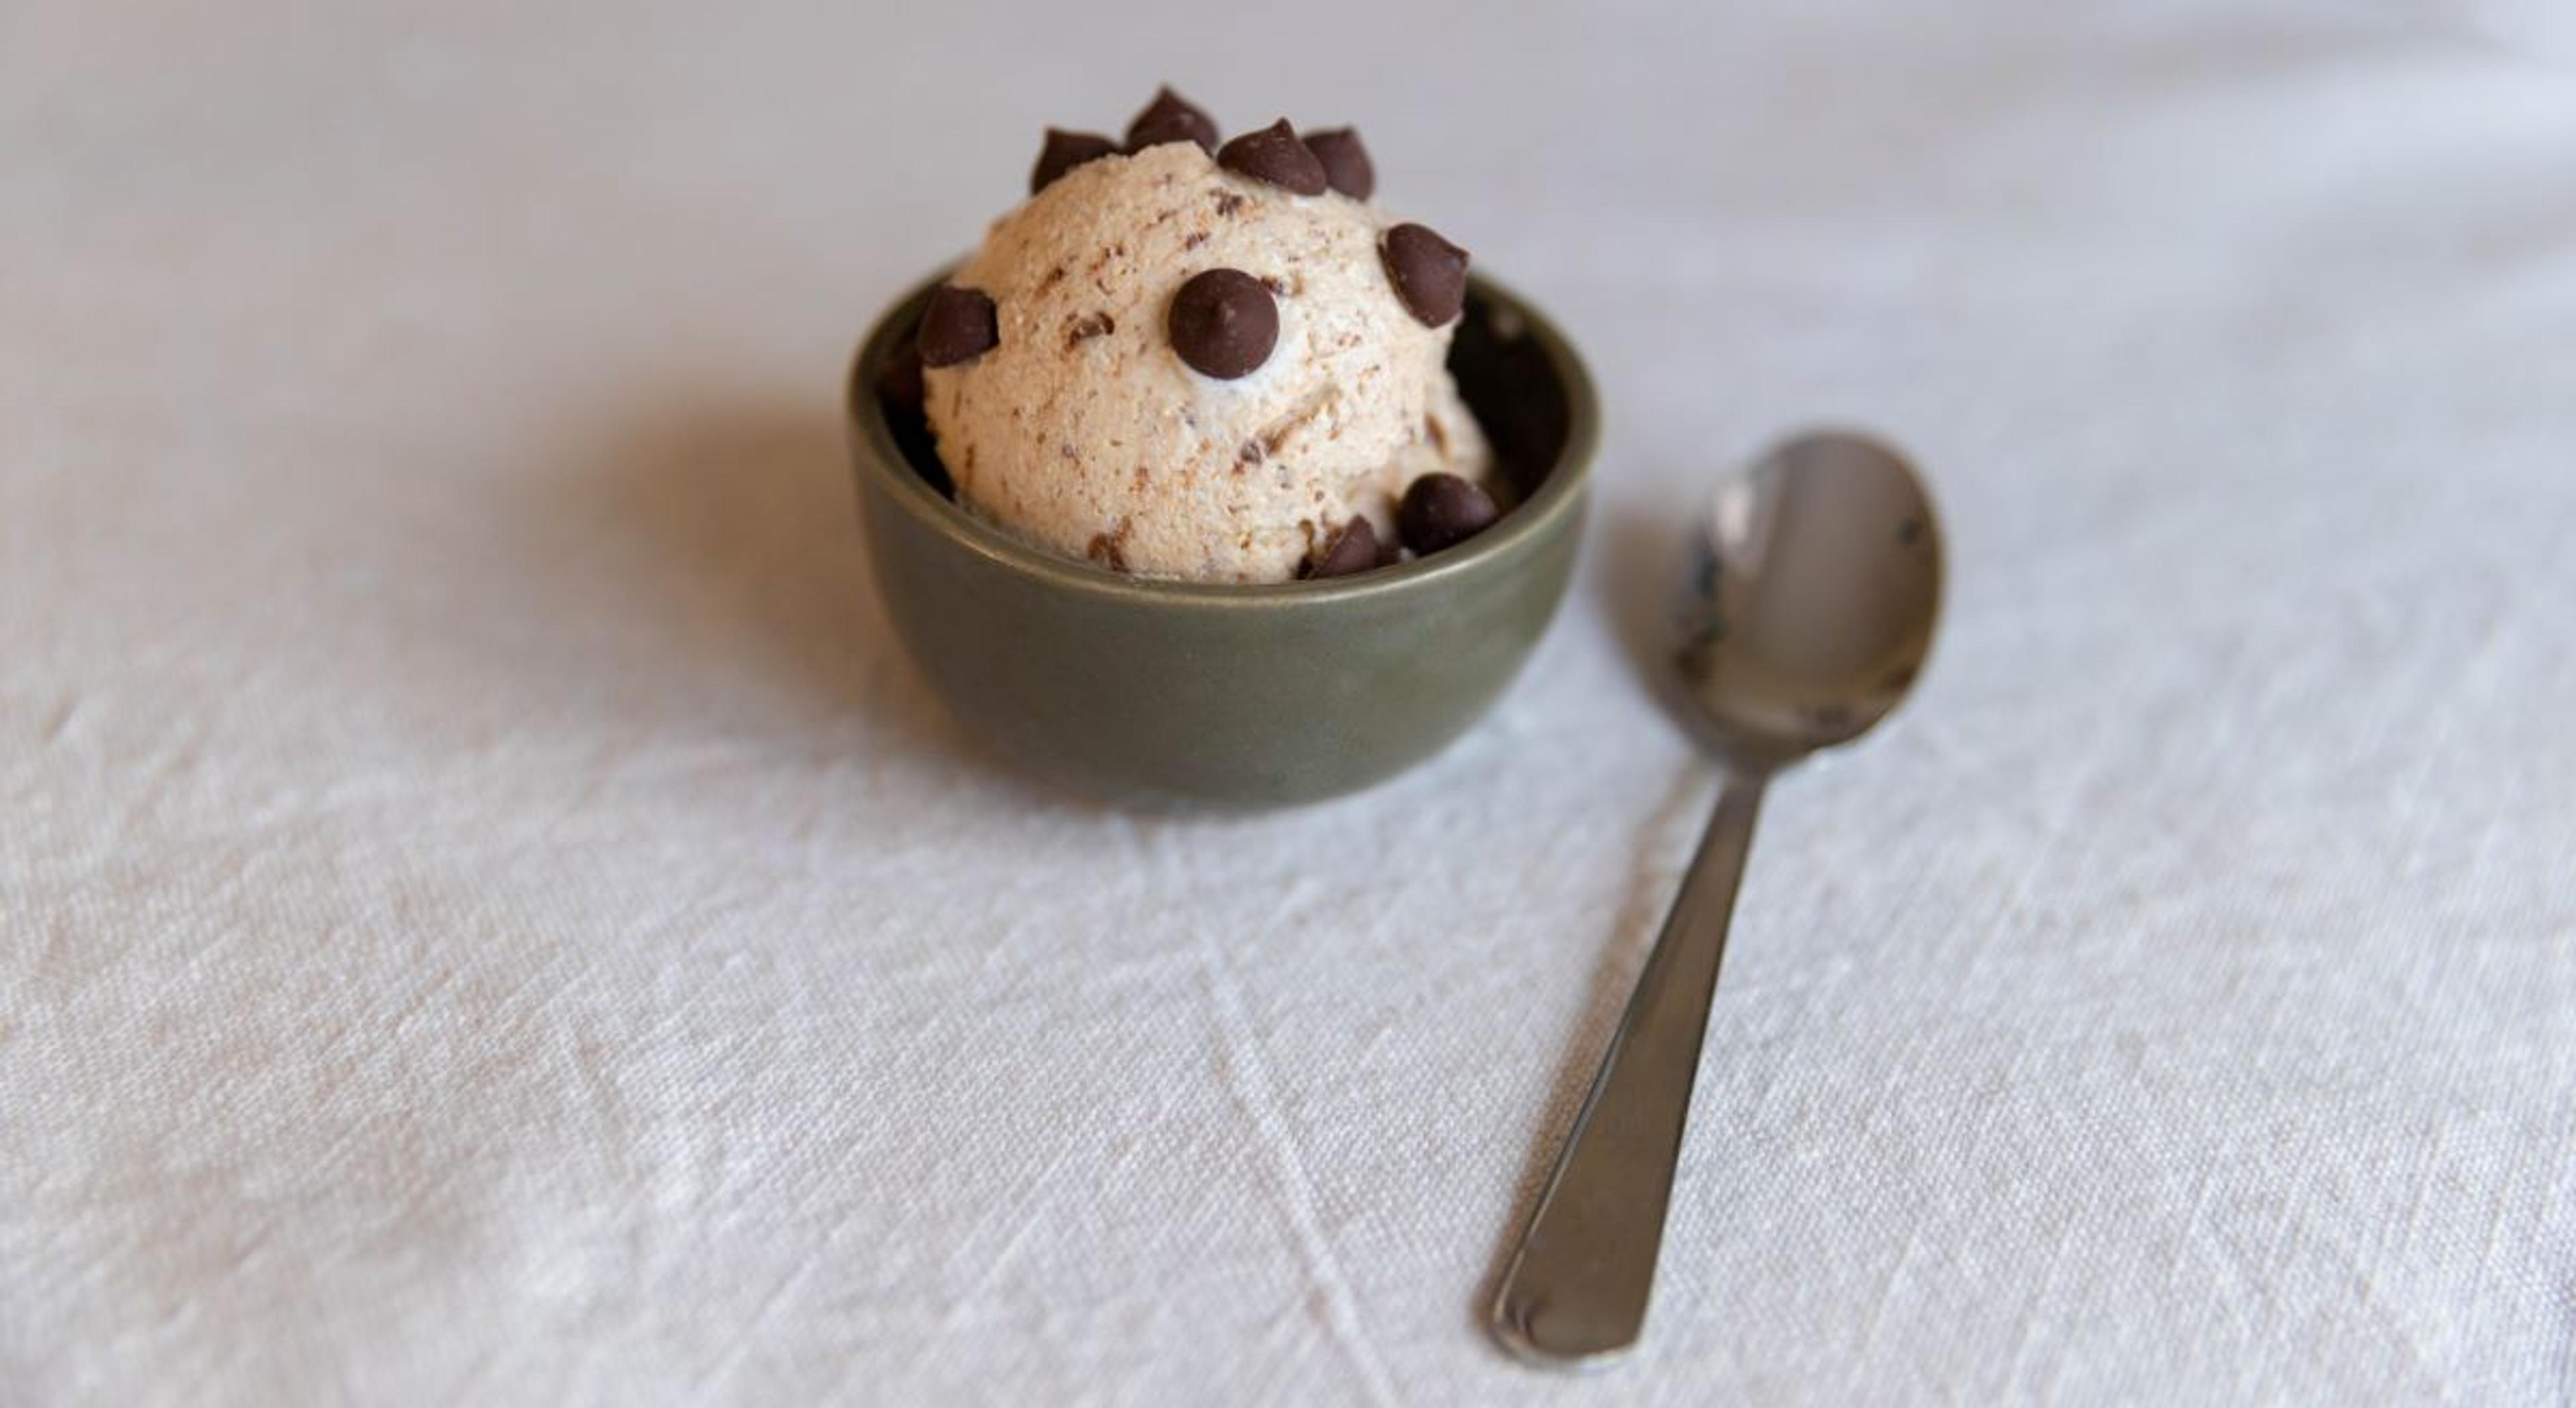 Peanut Butter Chocolate Chip Cottage Cheese Ice Cream on a table with a spoon.